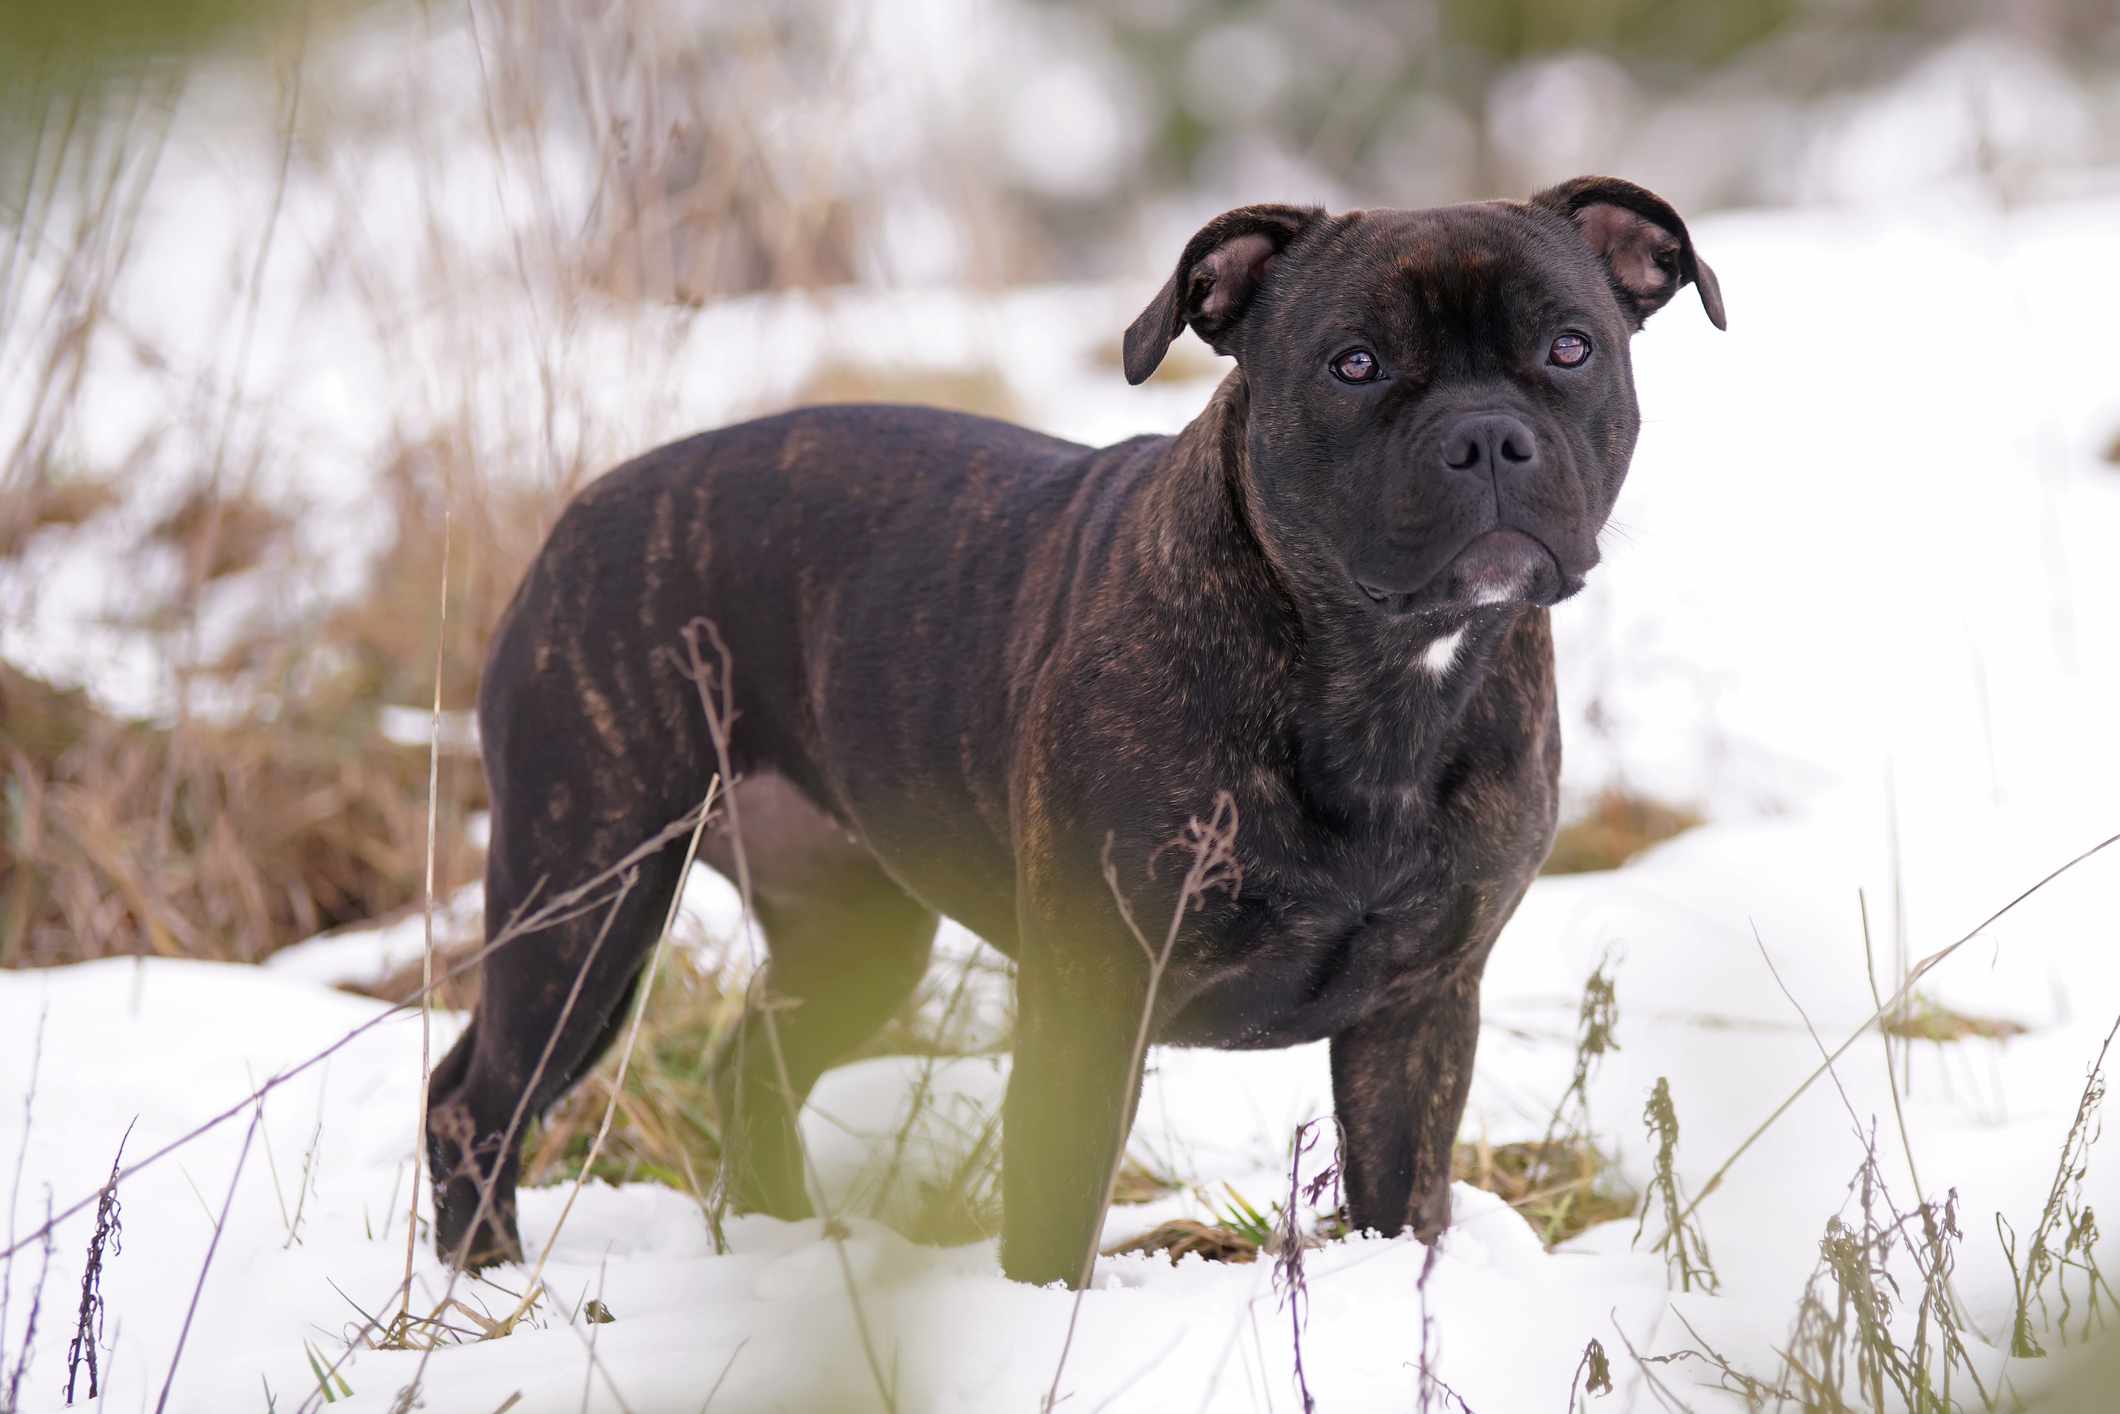 Brindle Staffordshire Bull Terrier standing in the snow